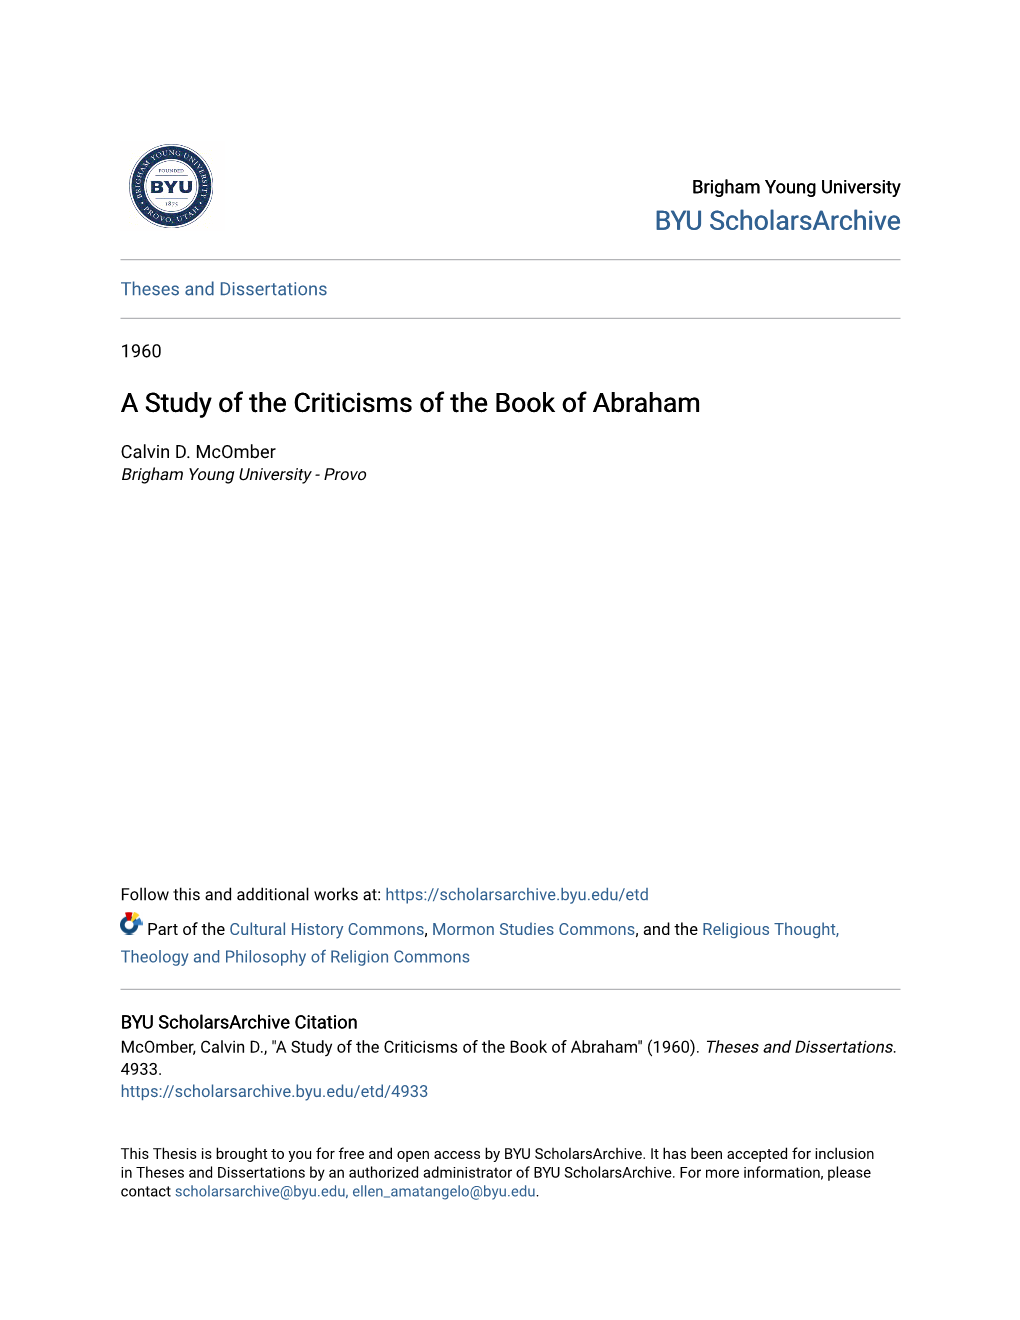 A Study of the Criticisms of the Book of Abraham